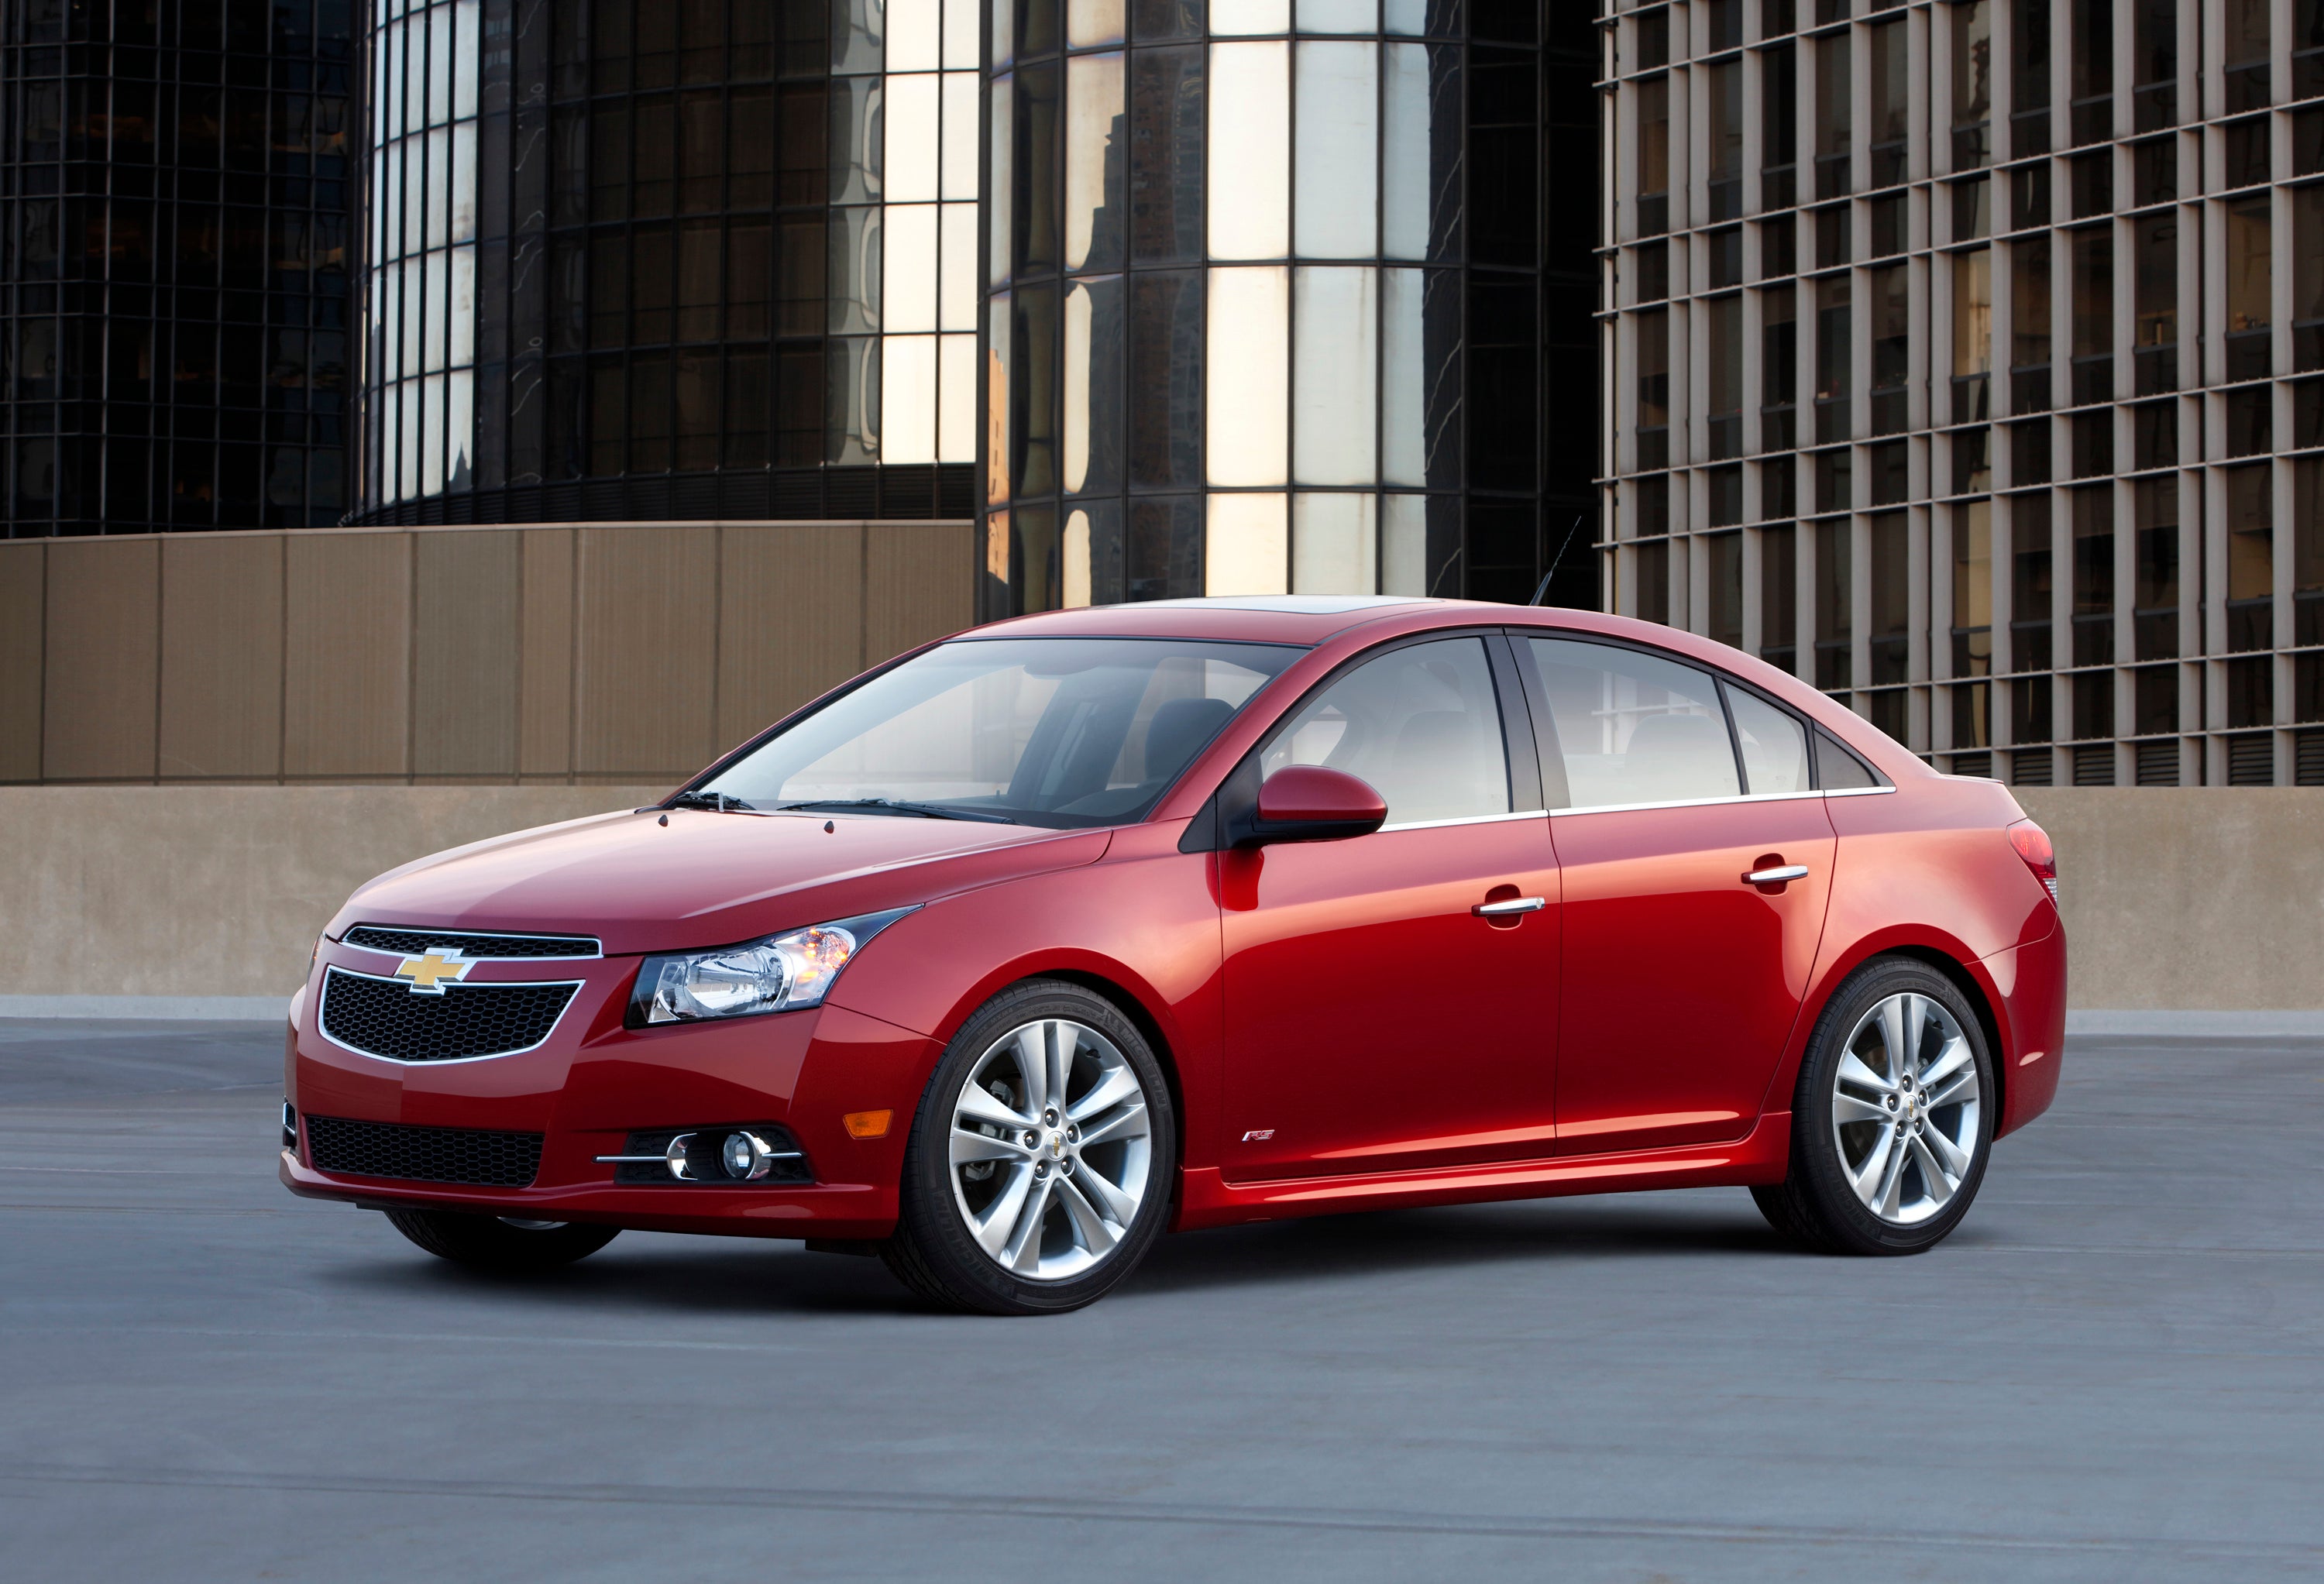 Used 2013 Chevrolet Cruze For Sale Near San Antonio, TX | Pre-Owned